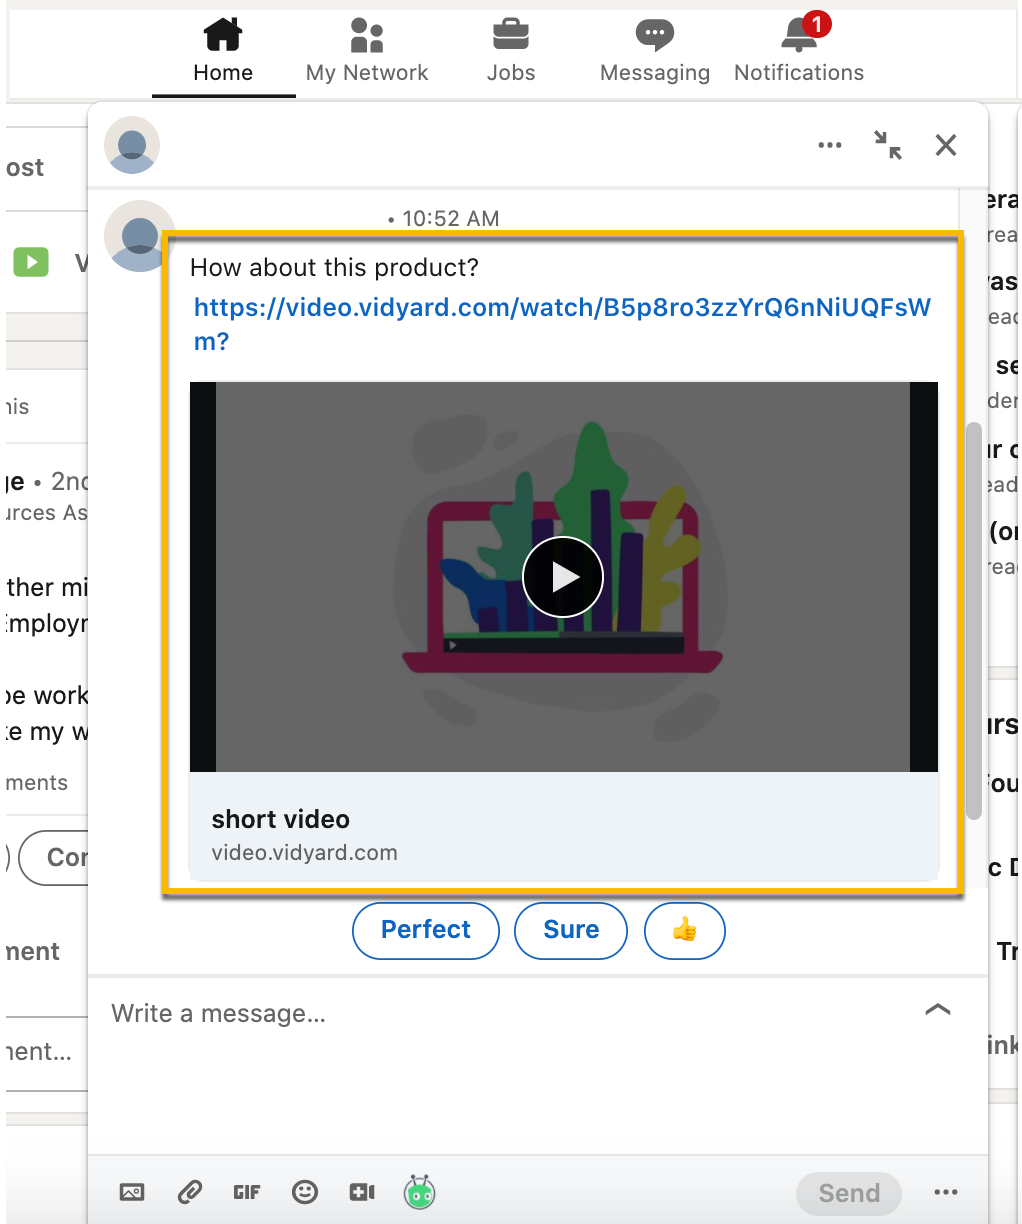 Vidyard thumbnail in LinkedIn direct message, with sharing link and title